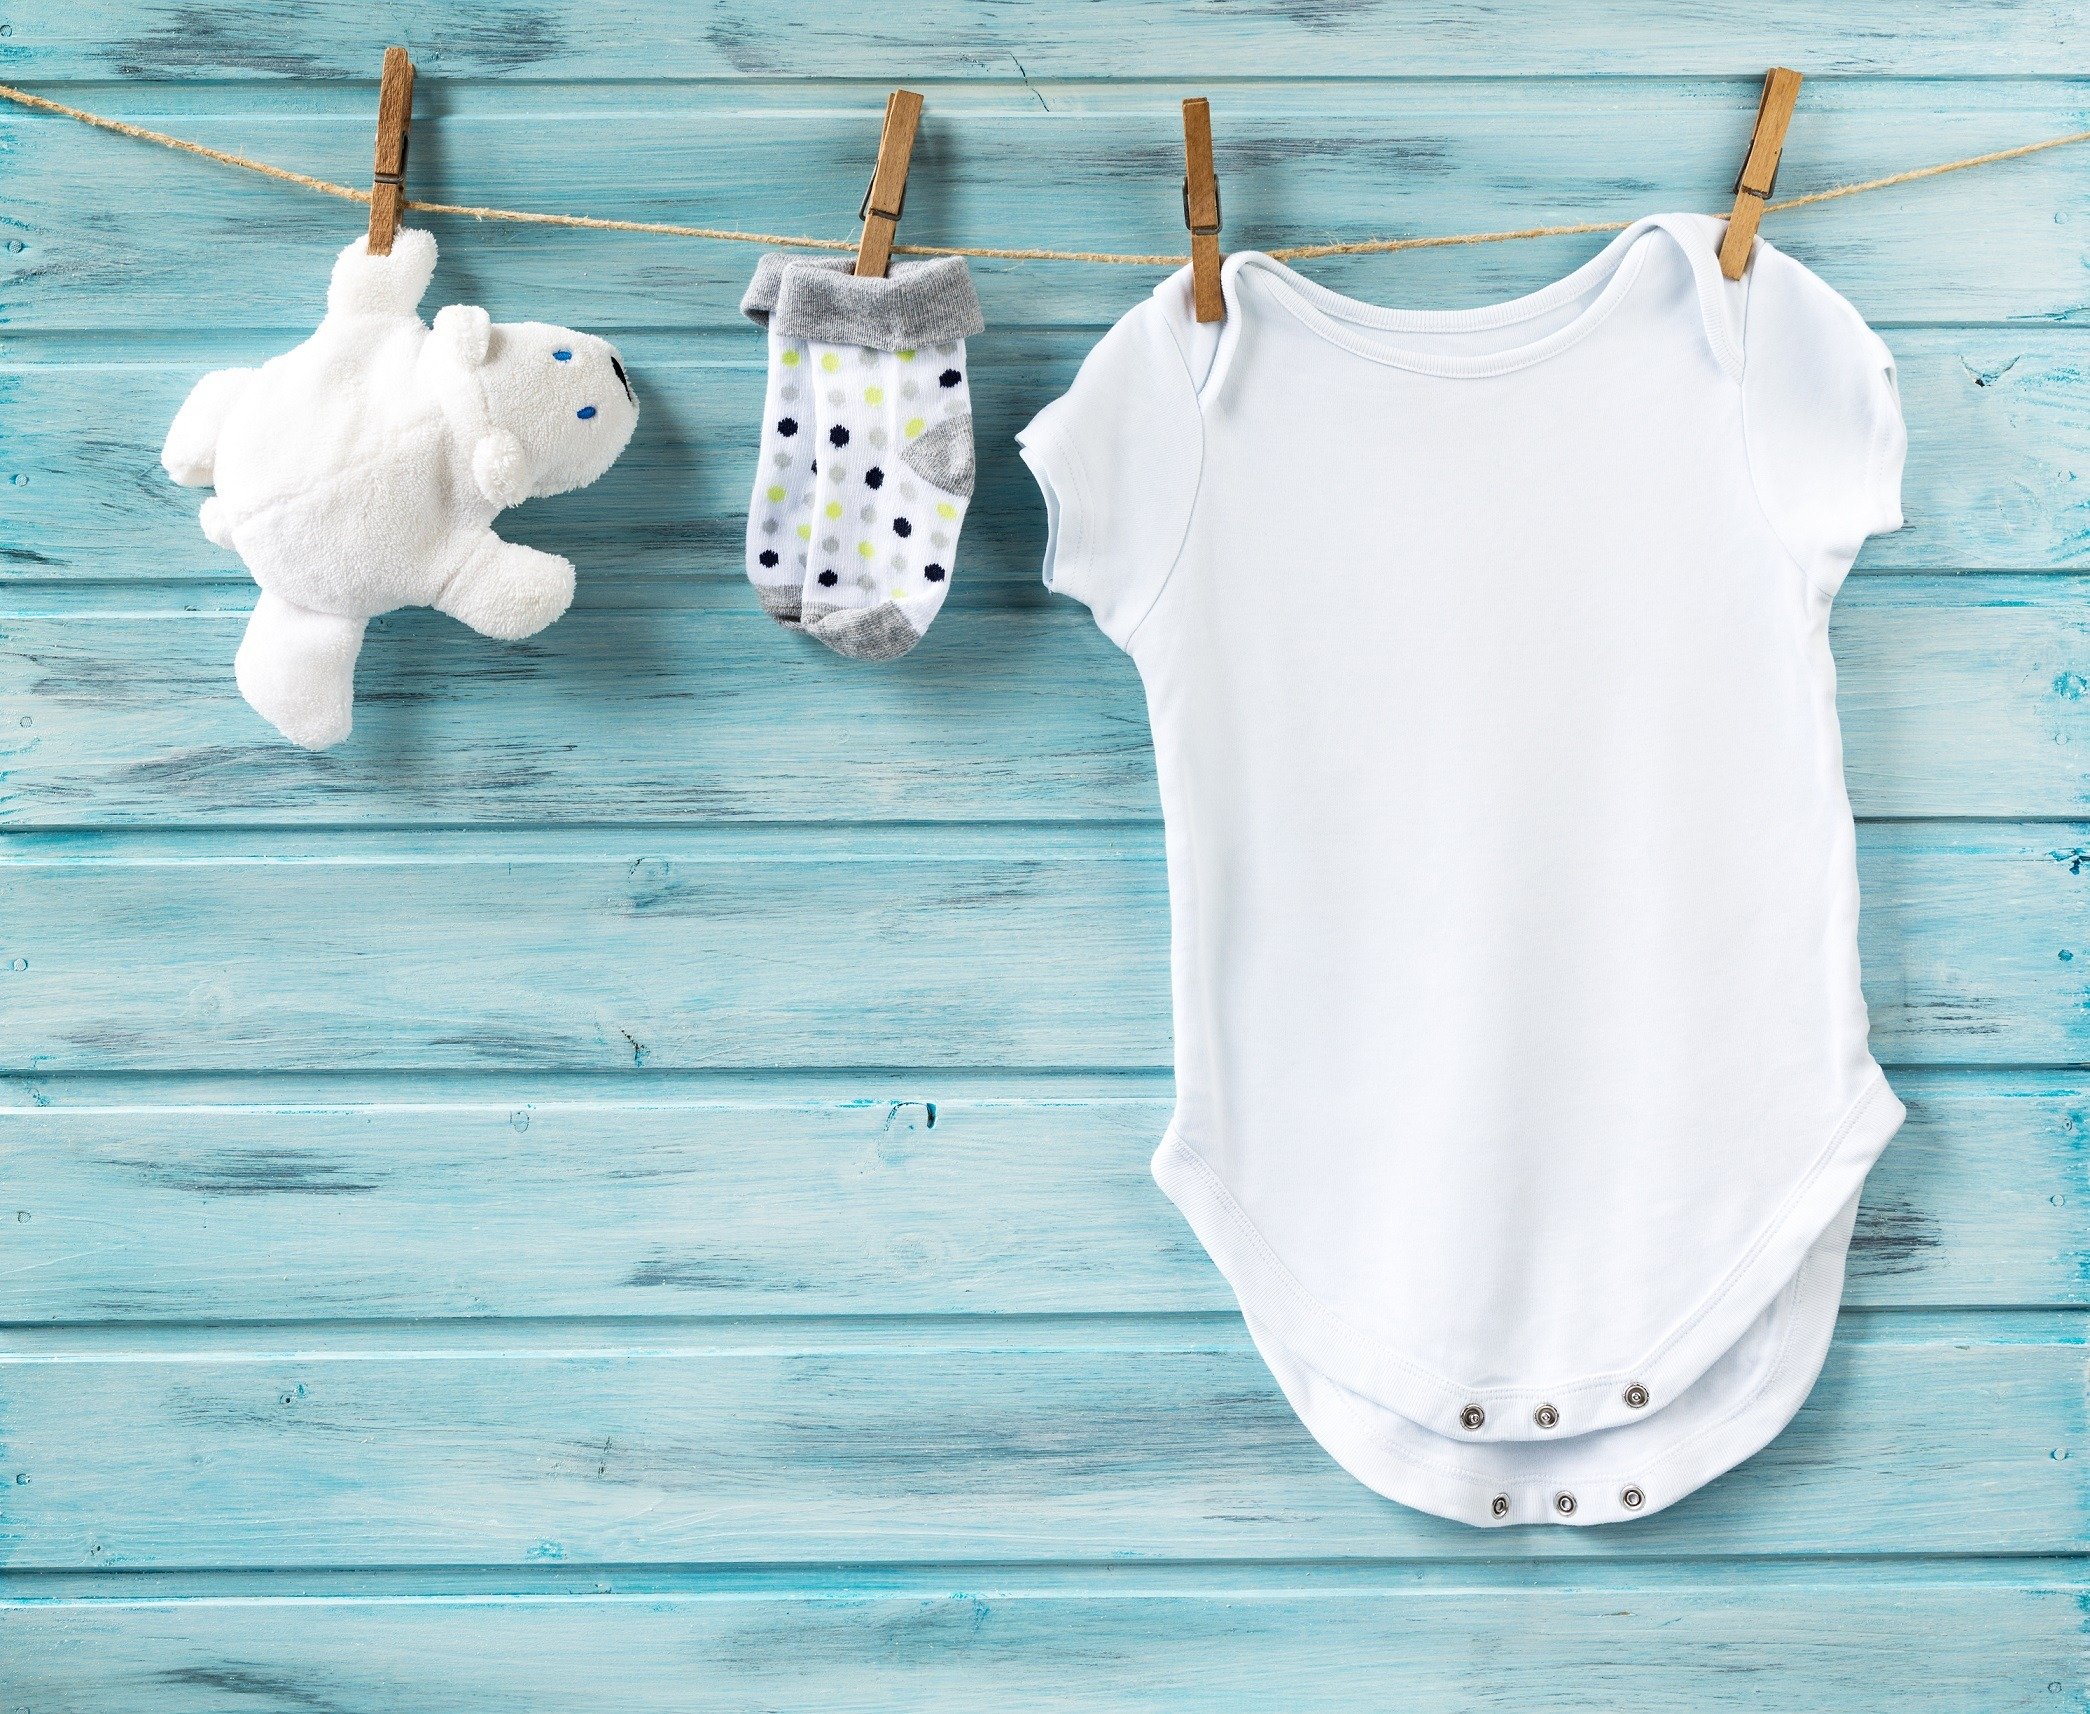 Blue background with white baby onesie and sock